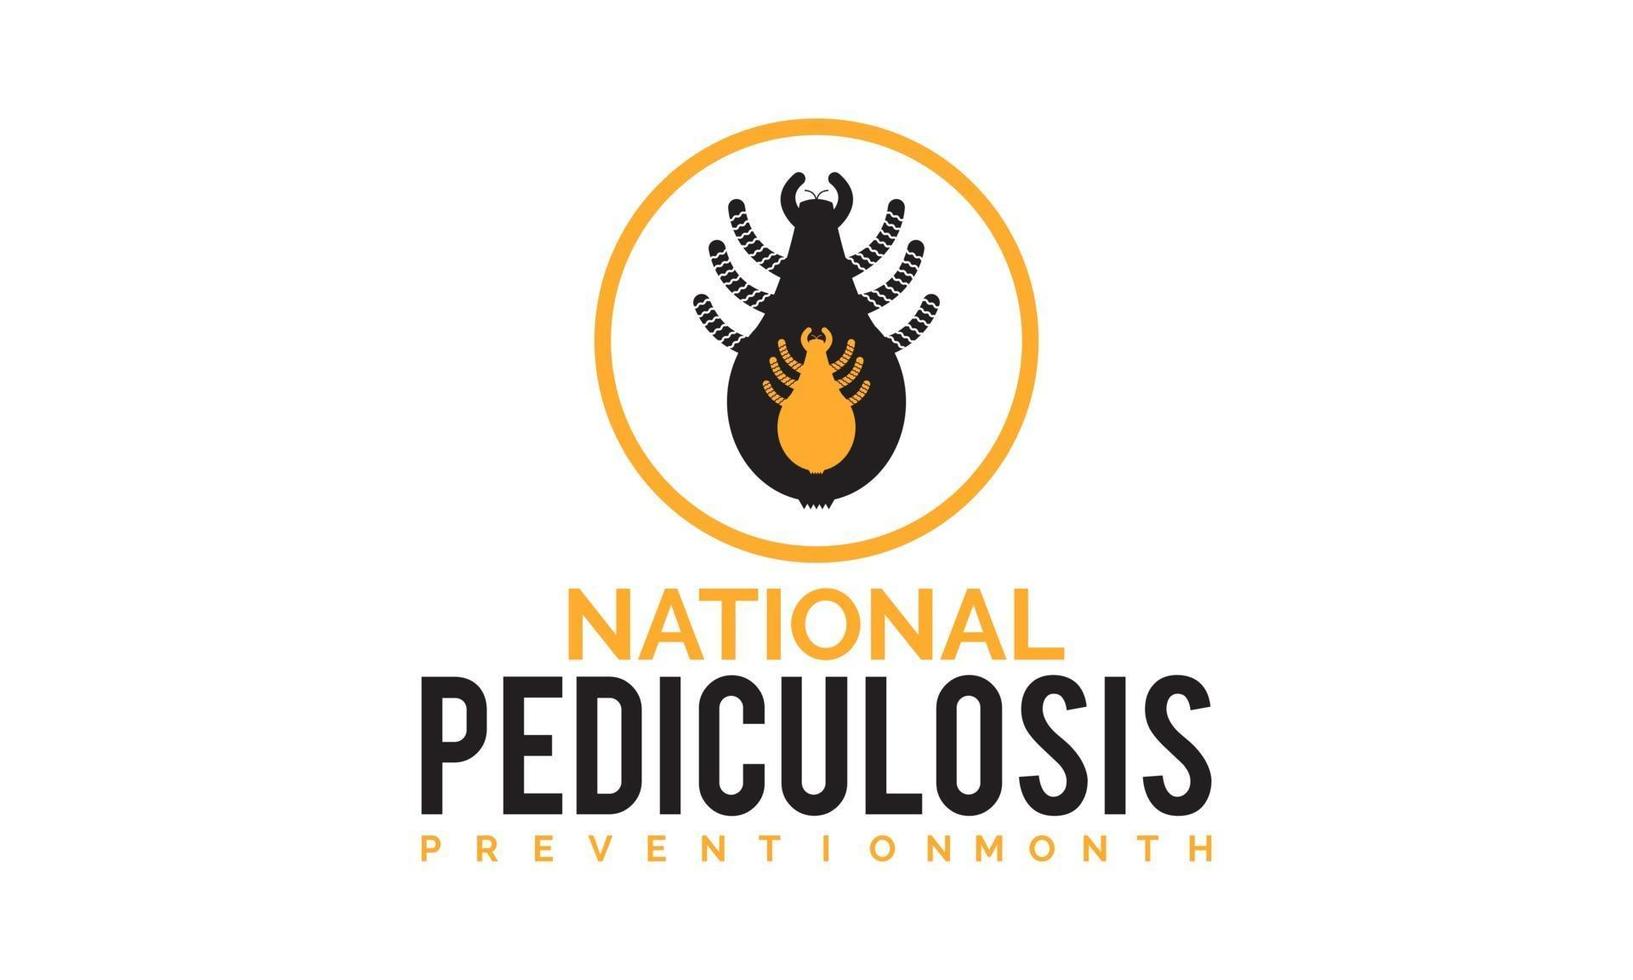 National pediculosis prevention month banner vector